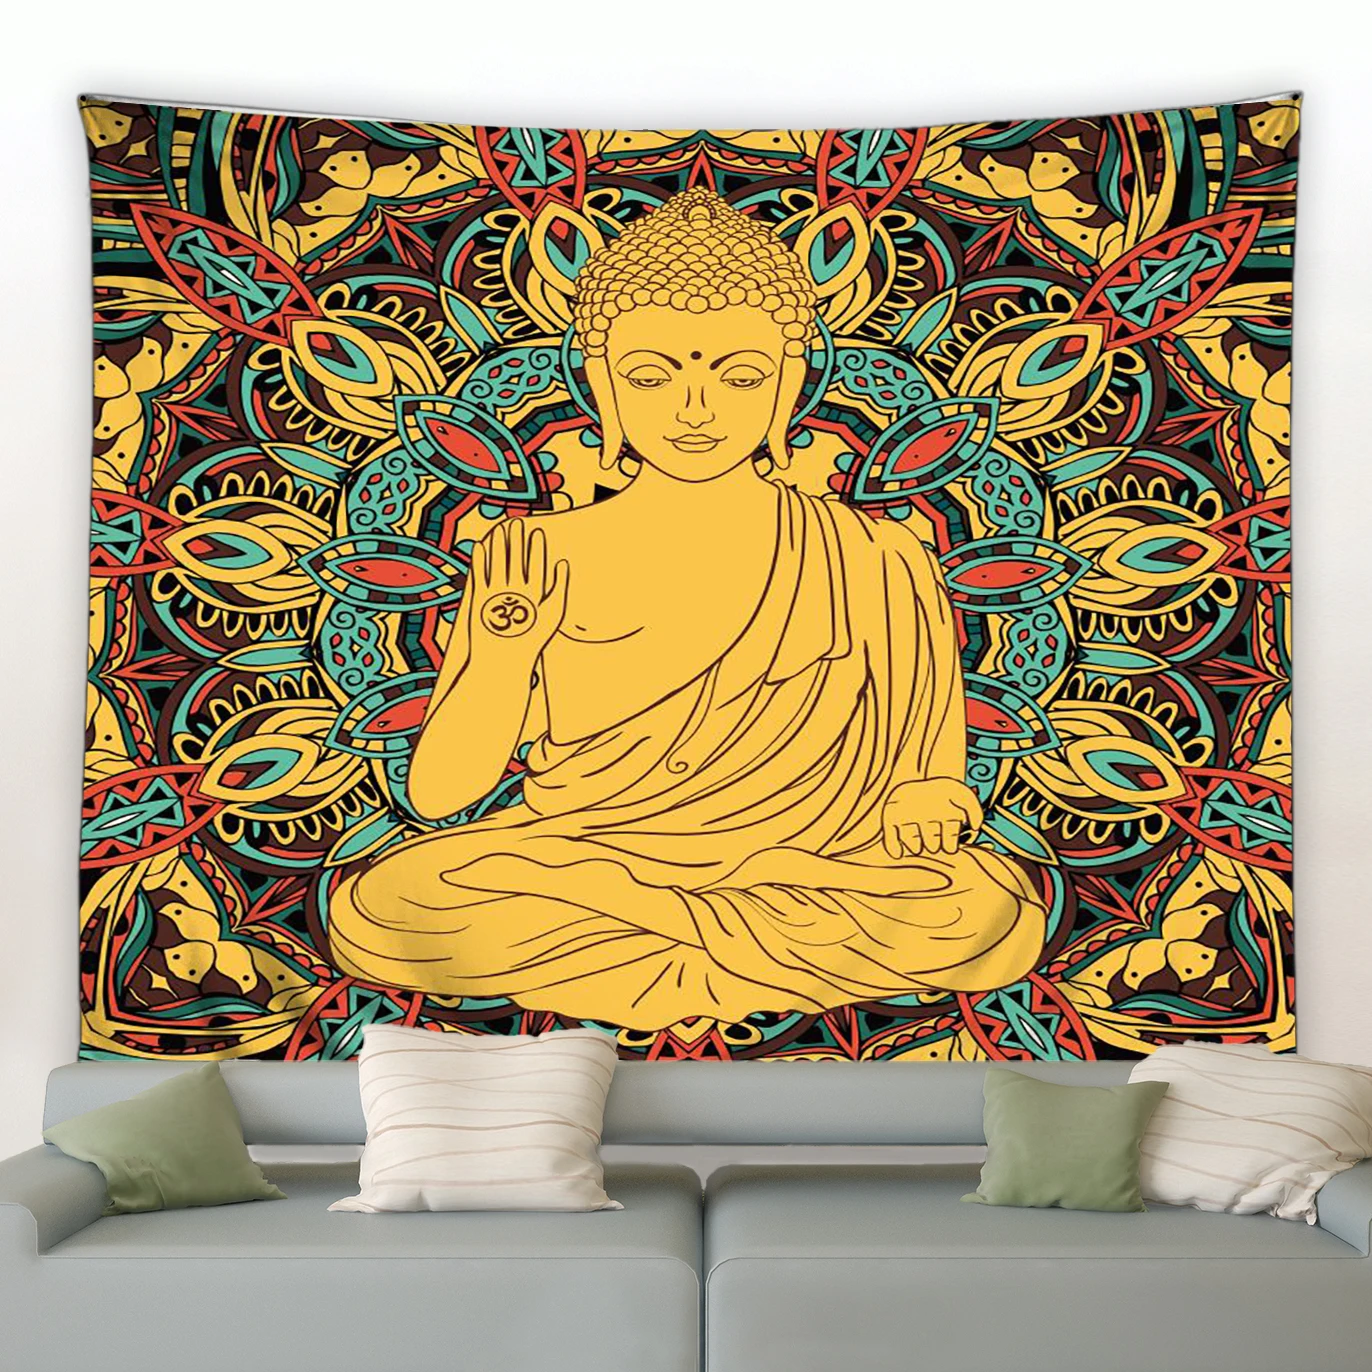 

Indian Buddha Statue Ancient Buddhist Tapestry Living Room Bedroom Wall Meditation Psychedelic Yoga Wall Hanging Hippie Bohemian